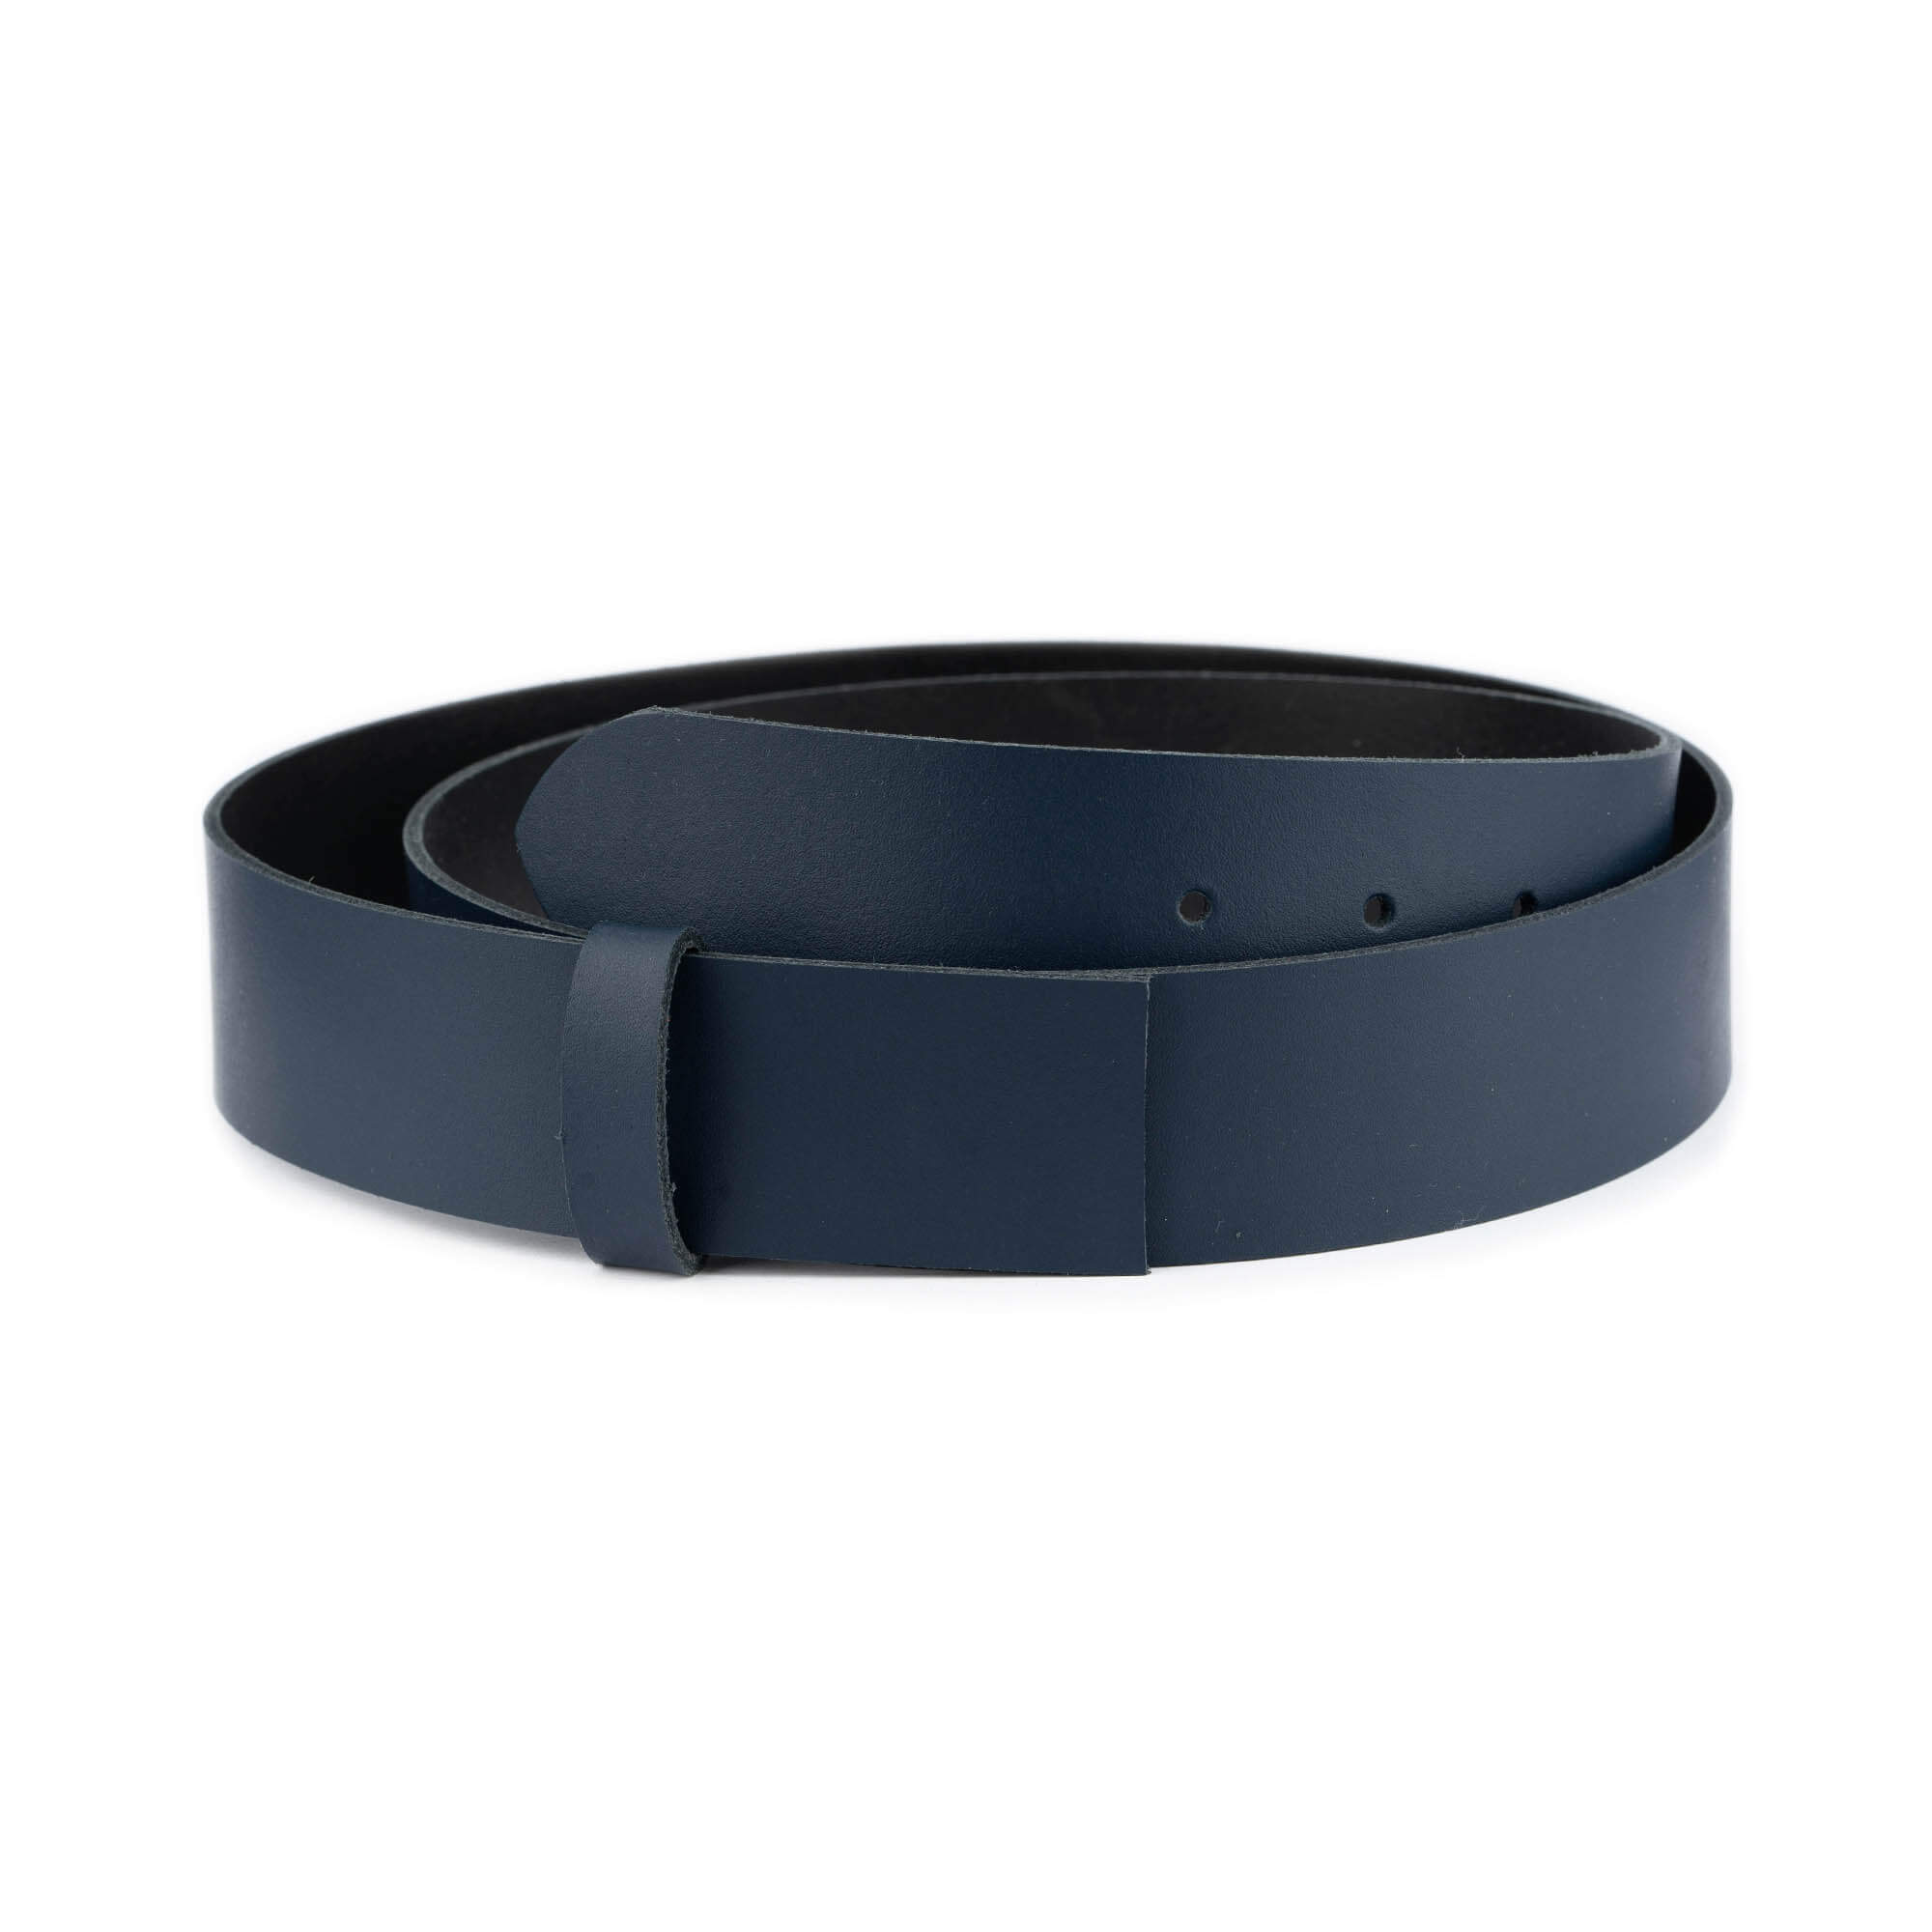 Buy Navy Blue Leather Strap For Belt Replacement 4.0 Cm